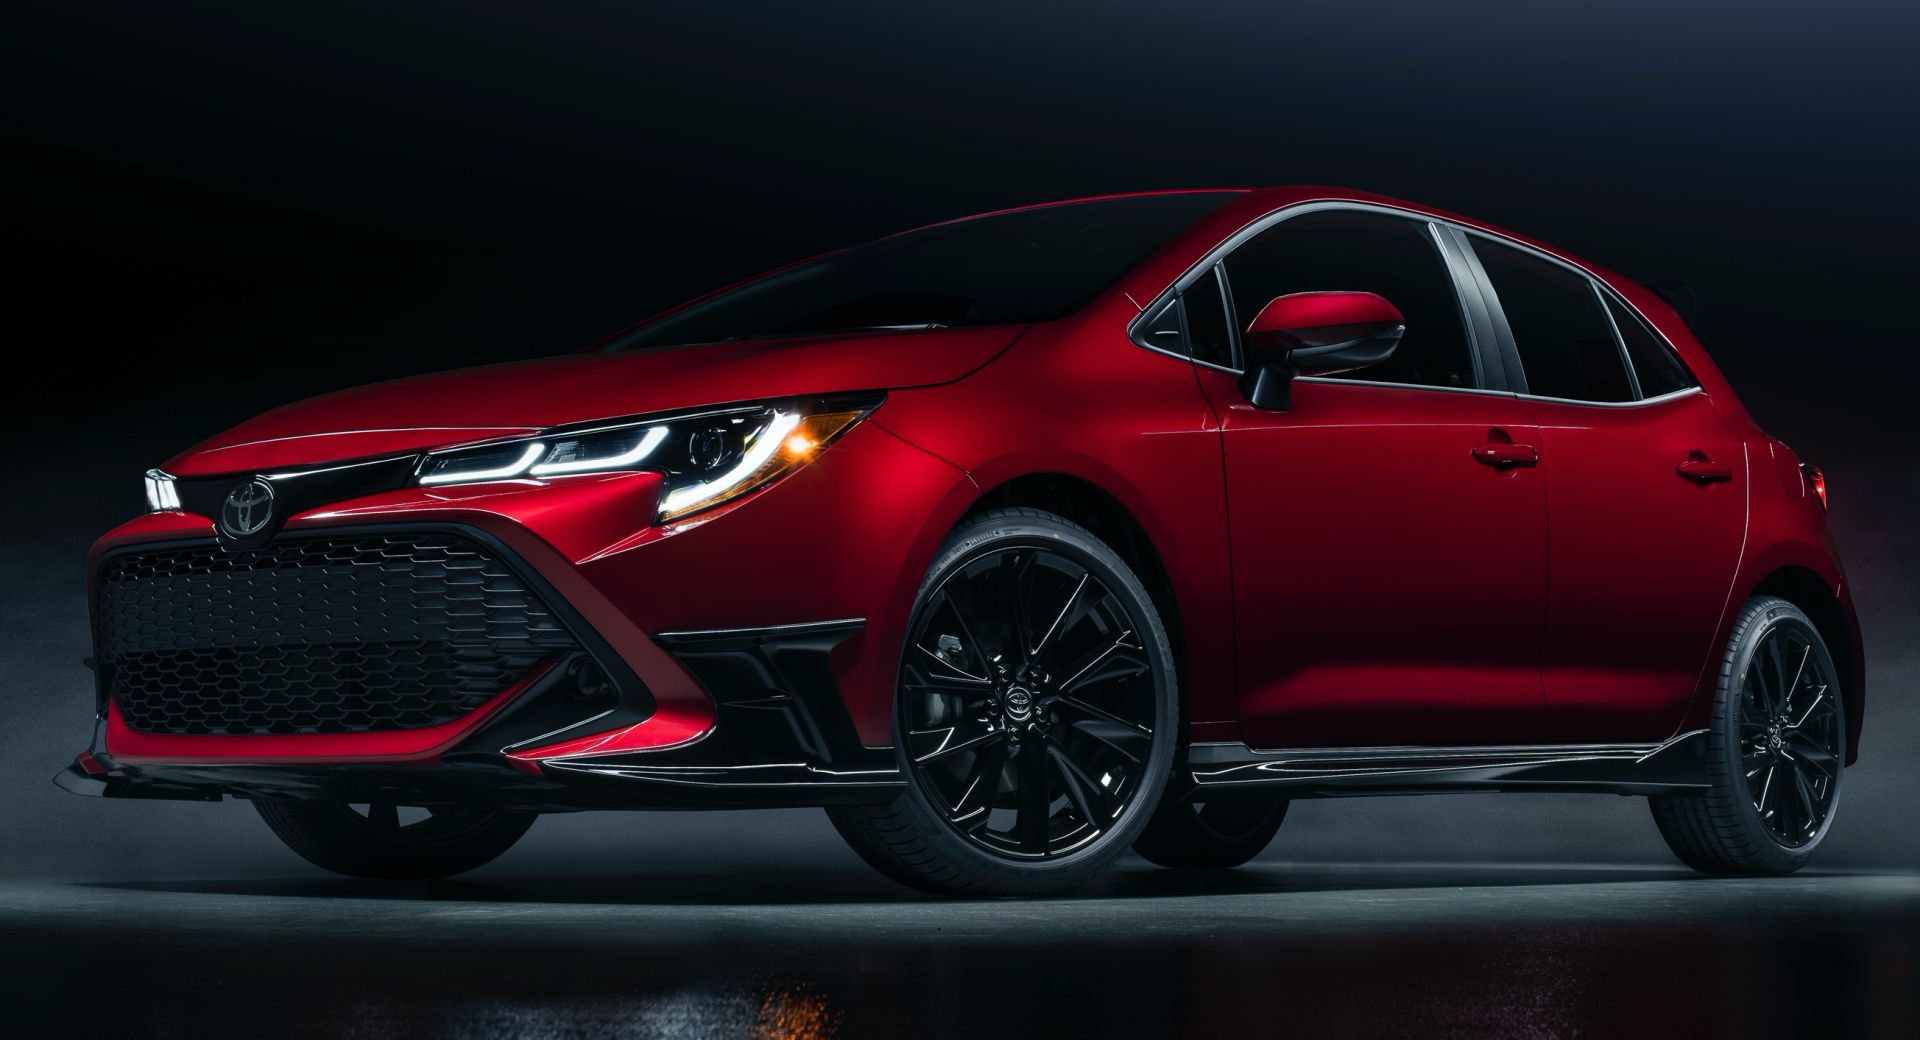 2021 Toyota Corolla Special Edition Wants To Give U.S. A Taste Of The  Coming GR Model | Carscoops